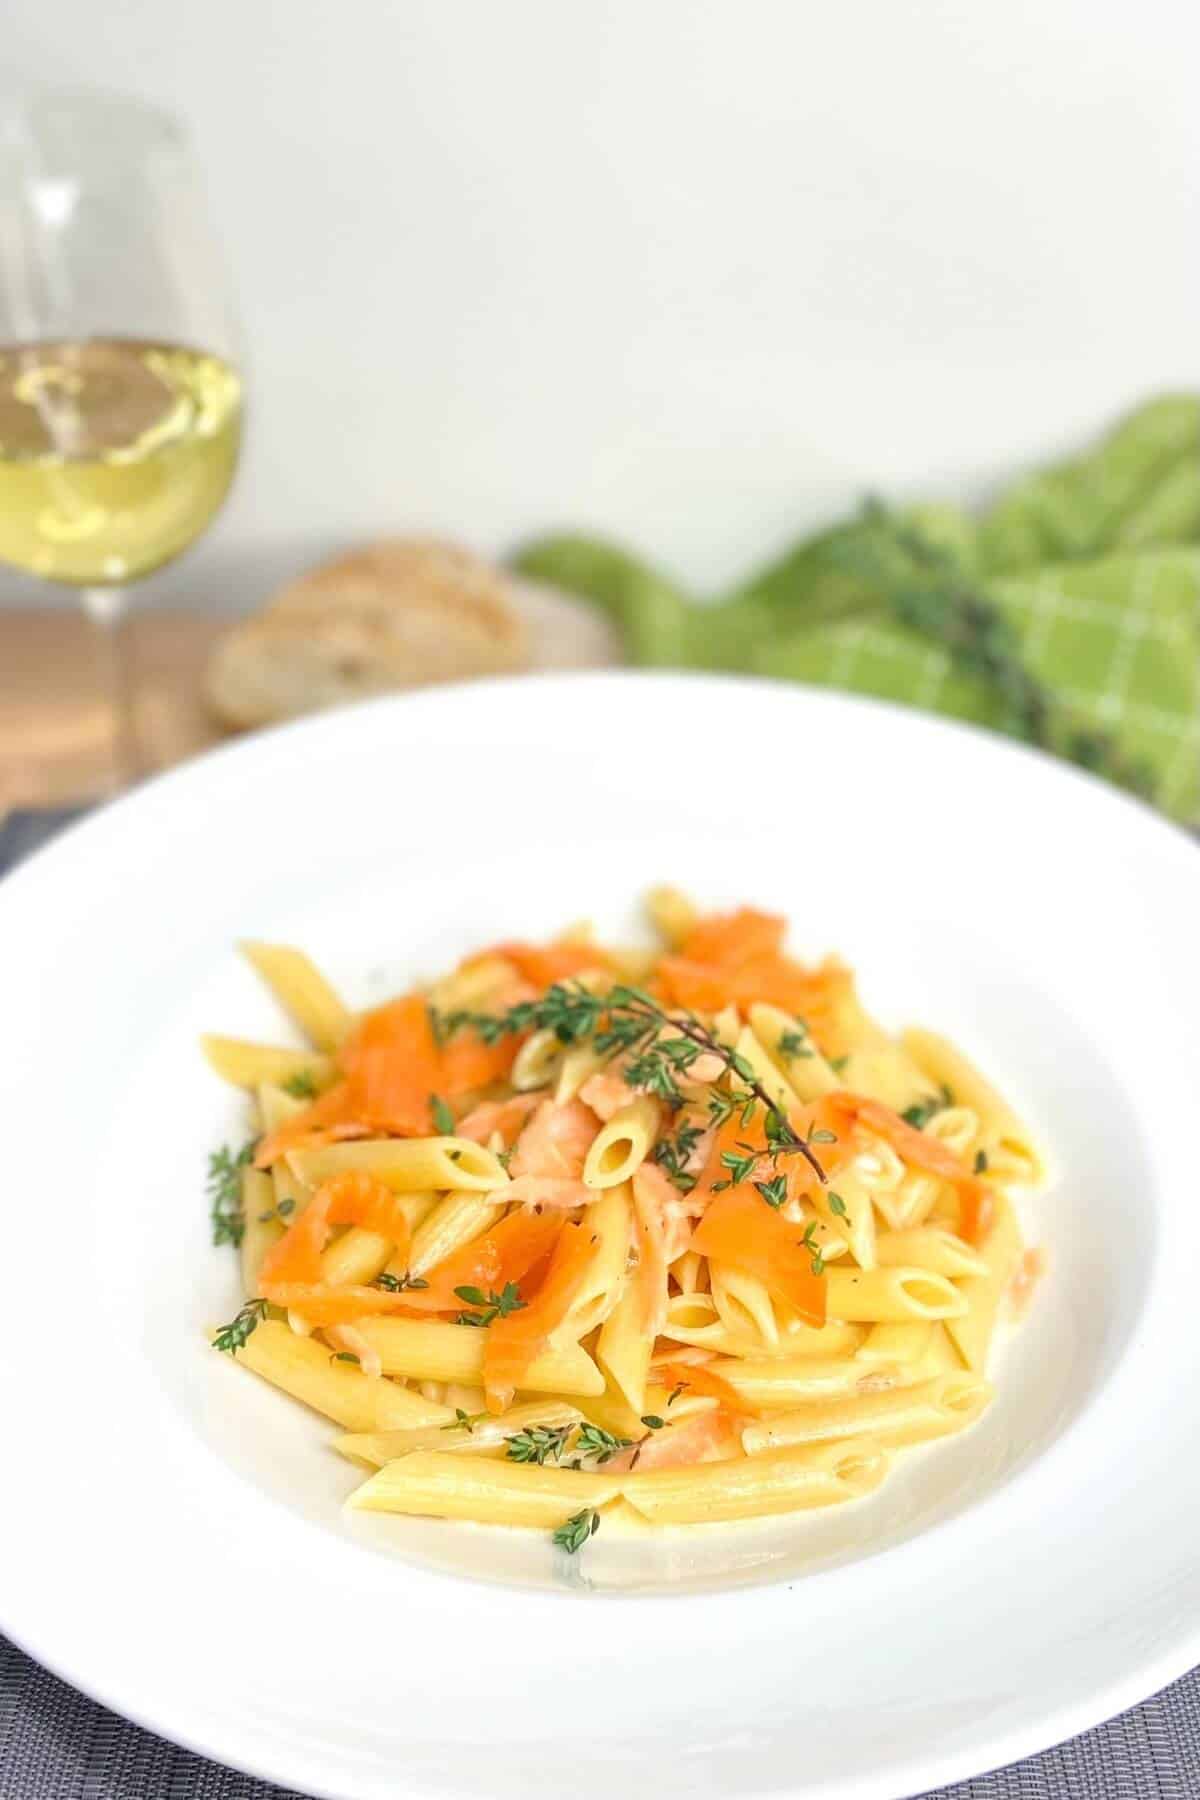 Penne with cream and smoked salmon.